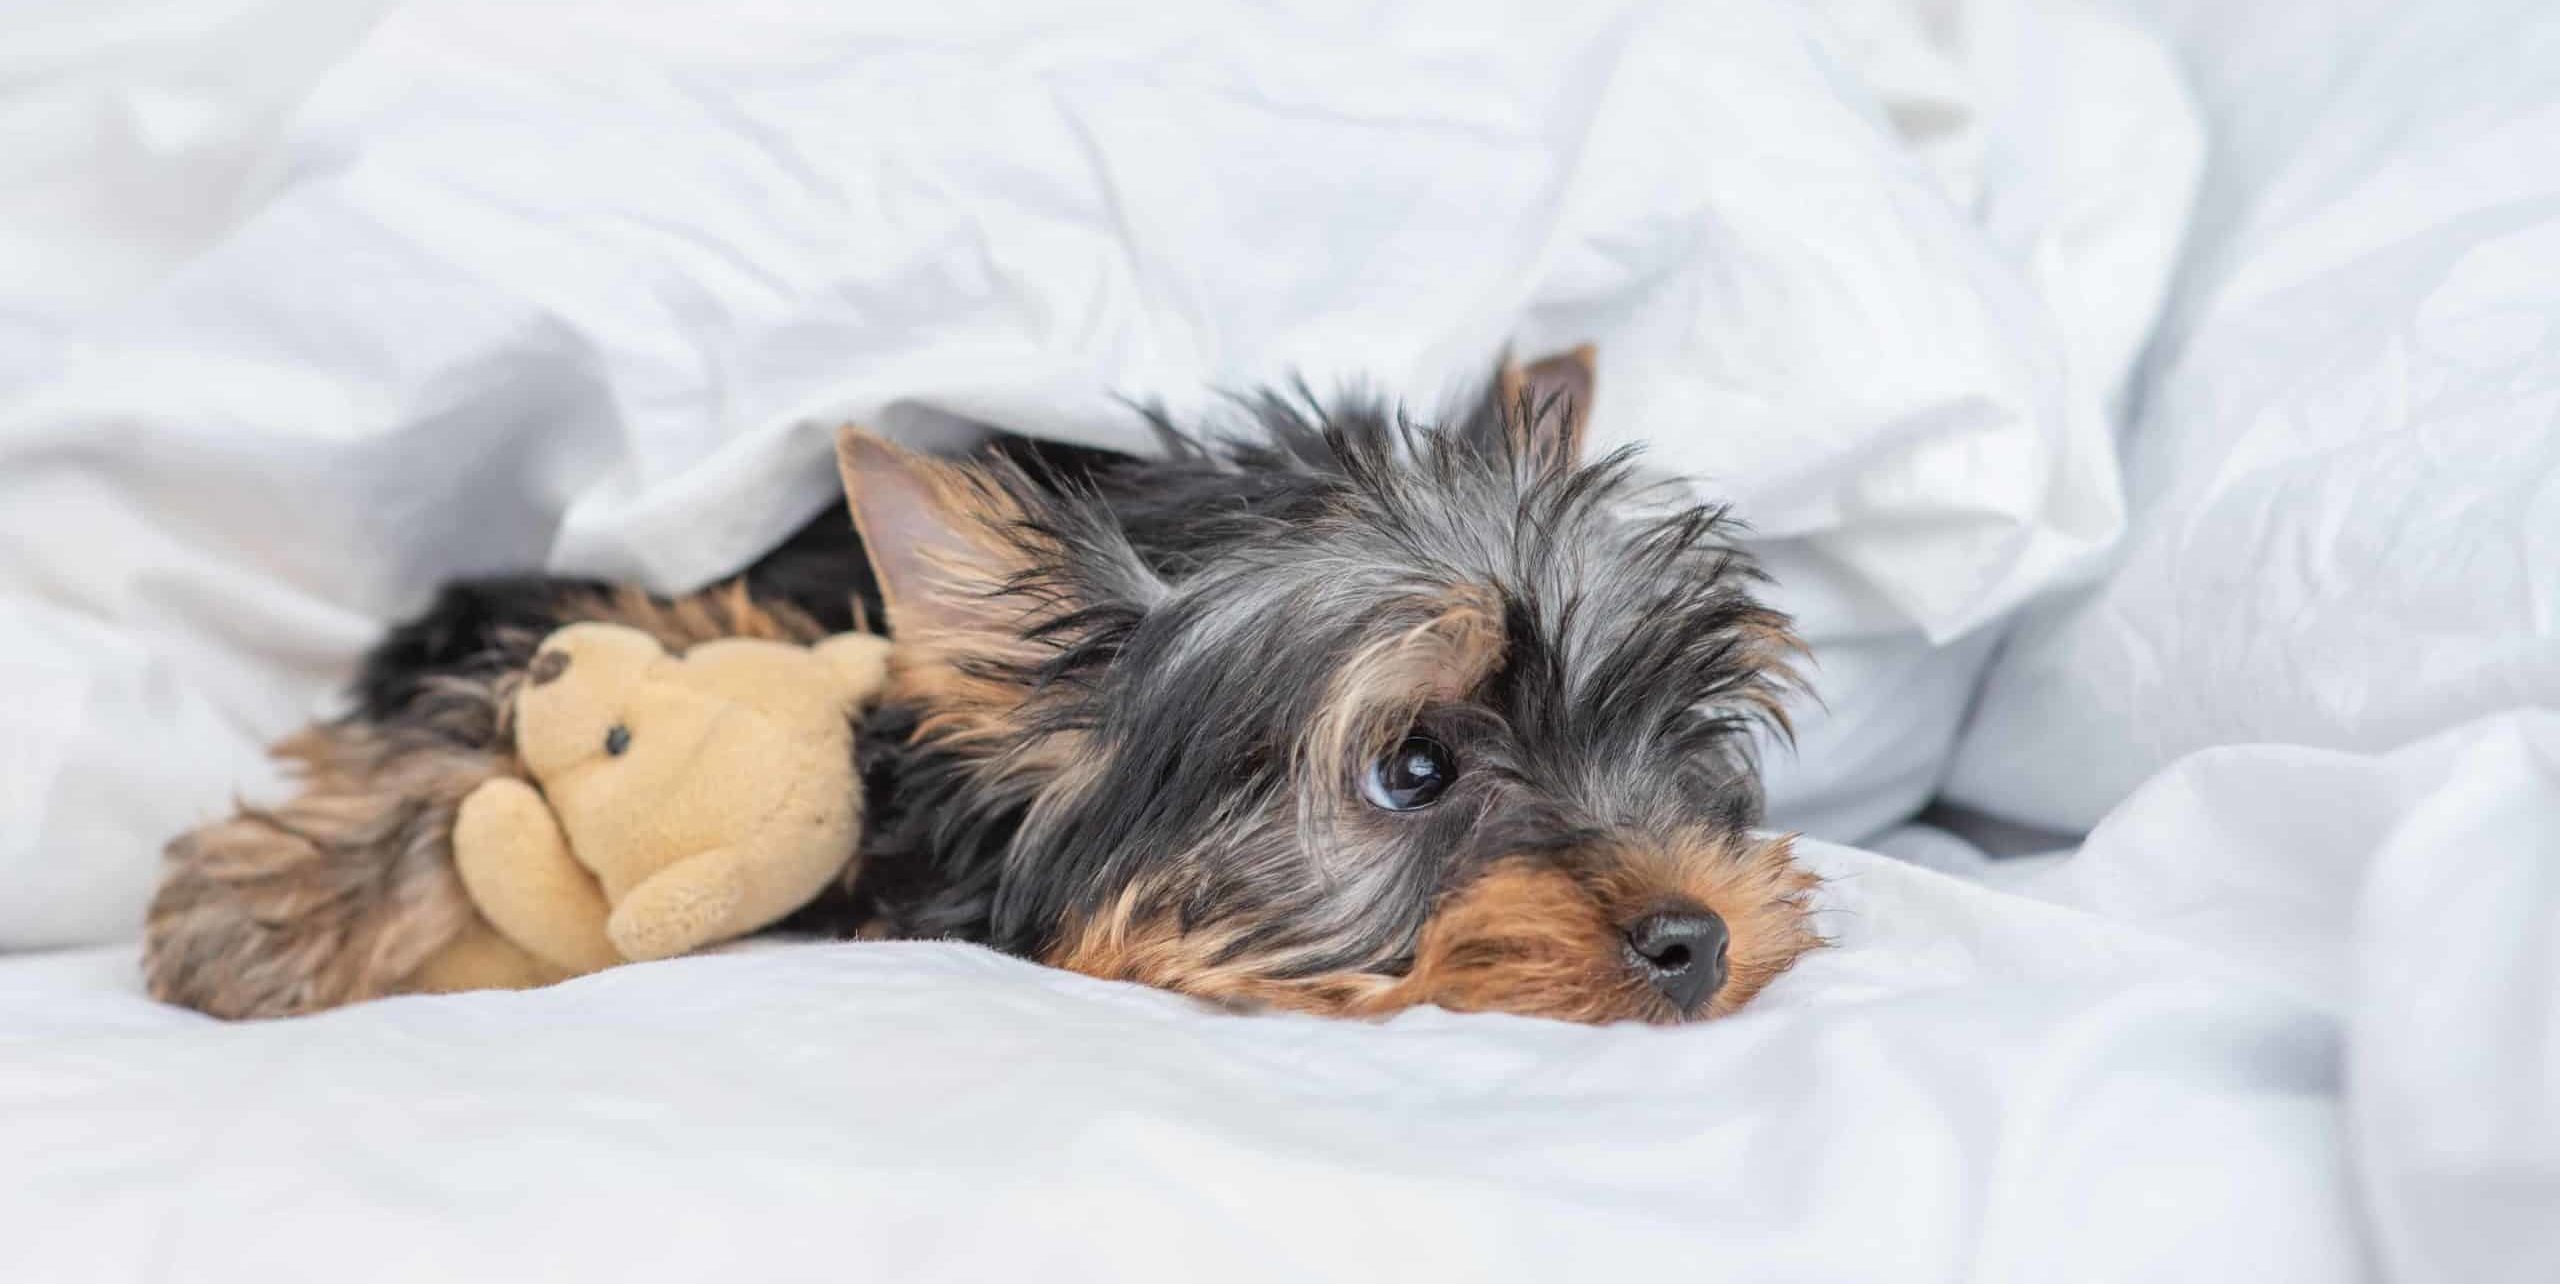 Yorkie cuddles with stuffed toy under covers on white bed. Don't ignore vital signs about your dog's health including loss of appetite, unexplained weight loss, persistent cough, or skin problems.